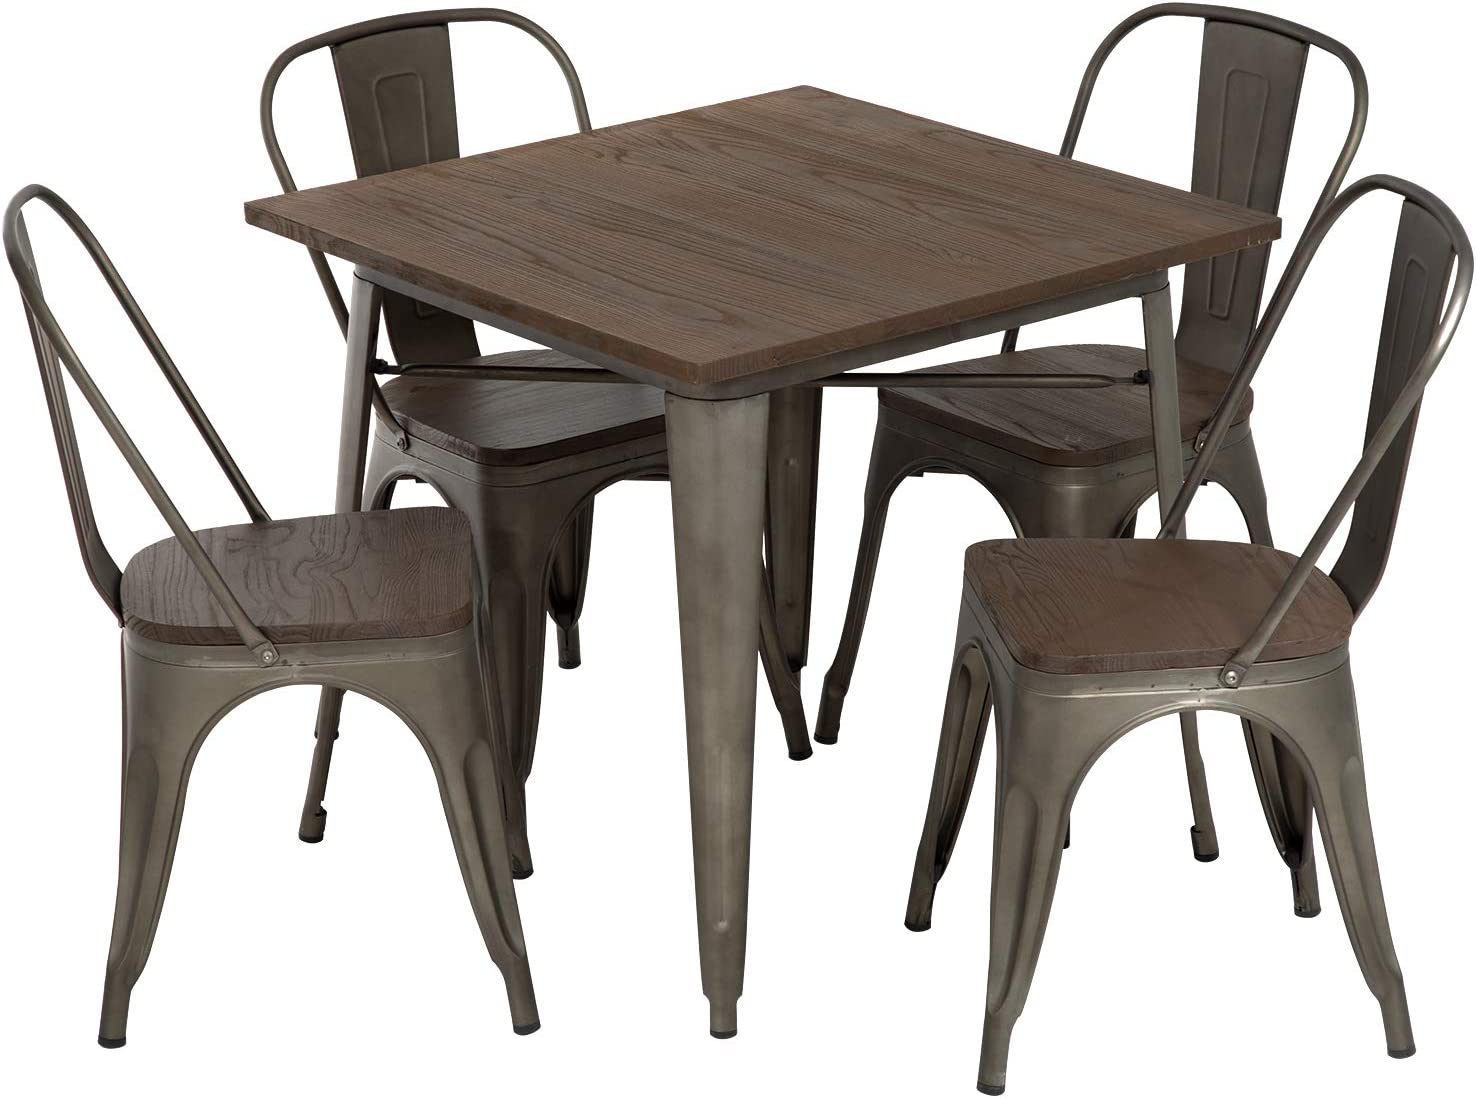 Metal Kitchen Table Set Dining Table Chairs Home Restaurant Wood Top Table Metal Dining Chairs Bar Coffee Table Set Indoor Outdoor Metal Base Table Patio Dining Table 4 Chairs Patio Furniture - image 1 of 7